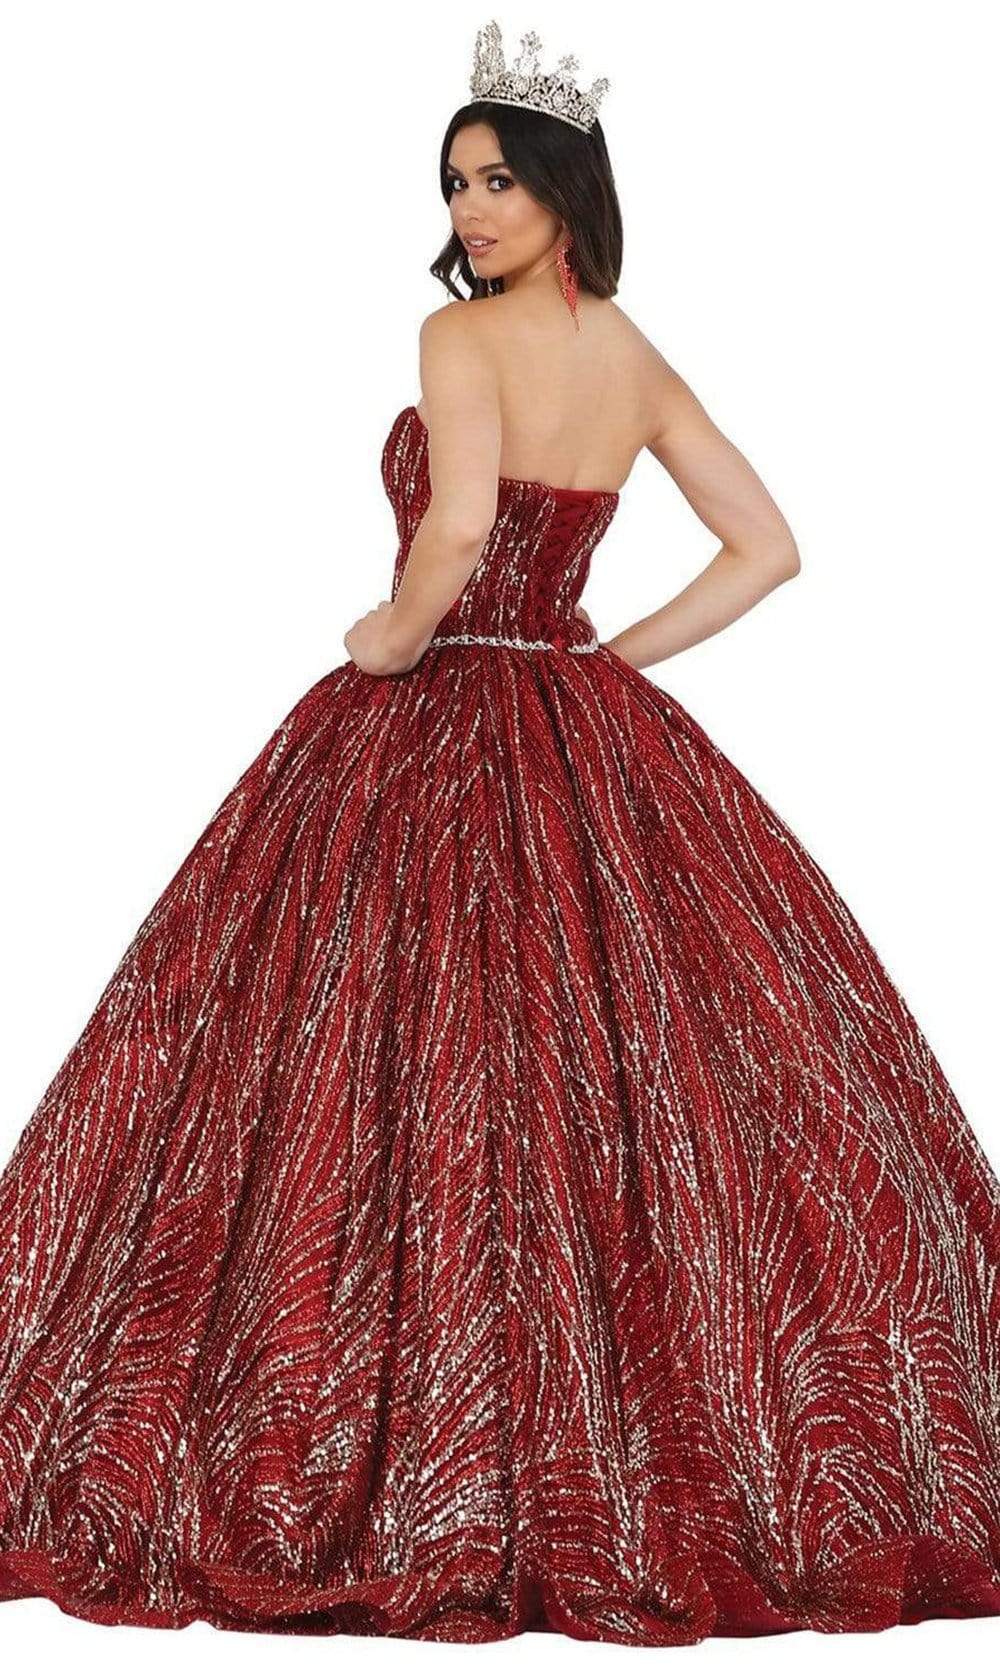 Dancing Queen - 1453 Embellished Strapless Sweetheart Ballgown Quinceanera Dresses